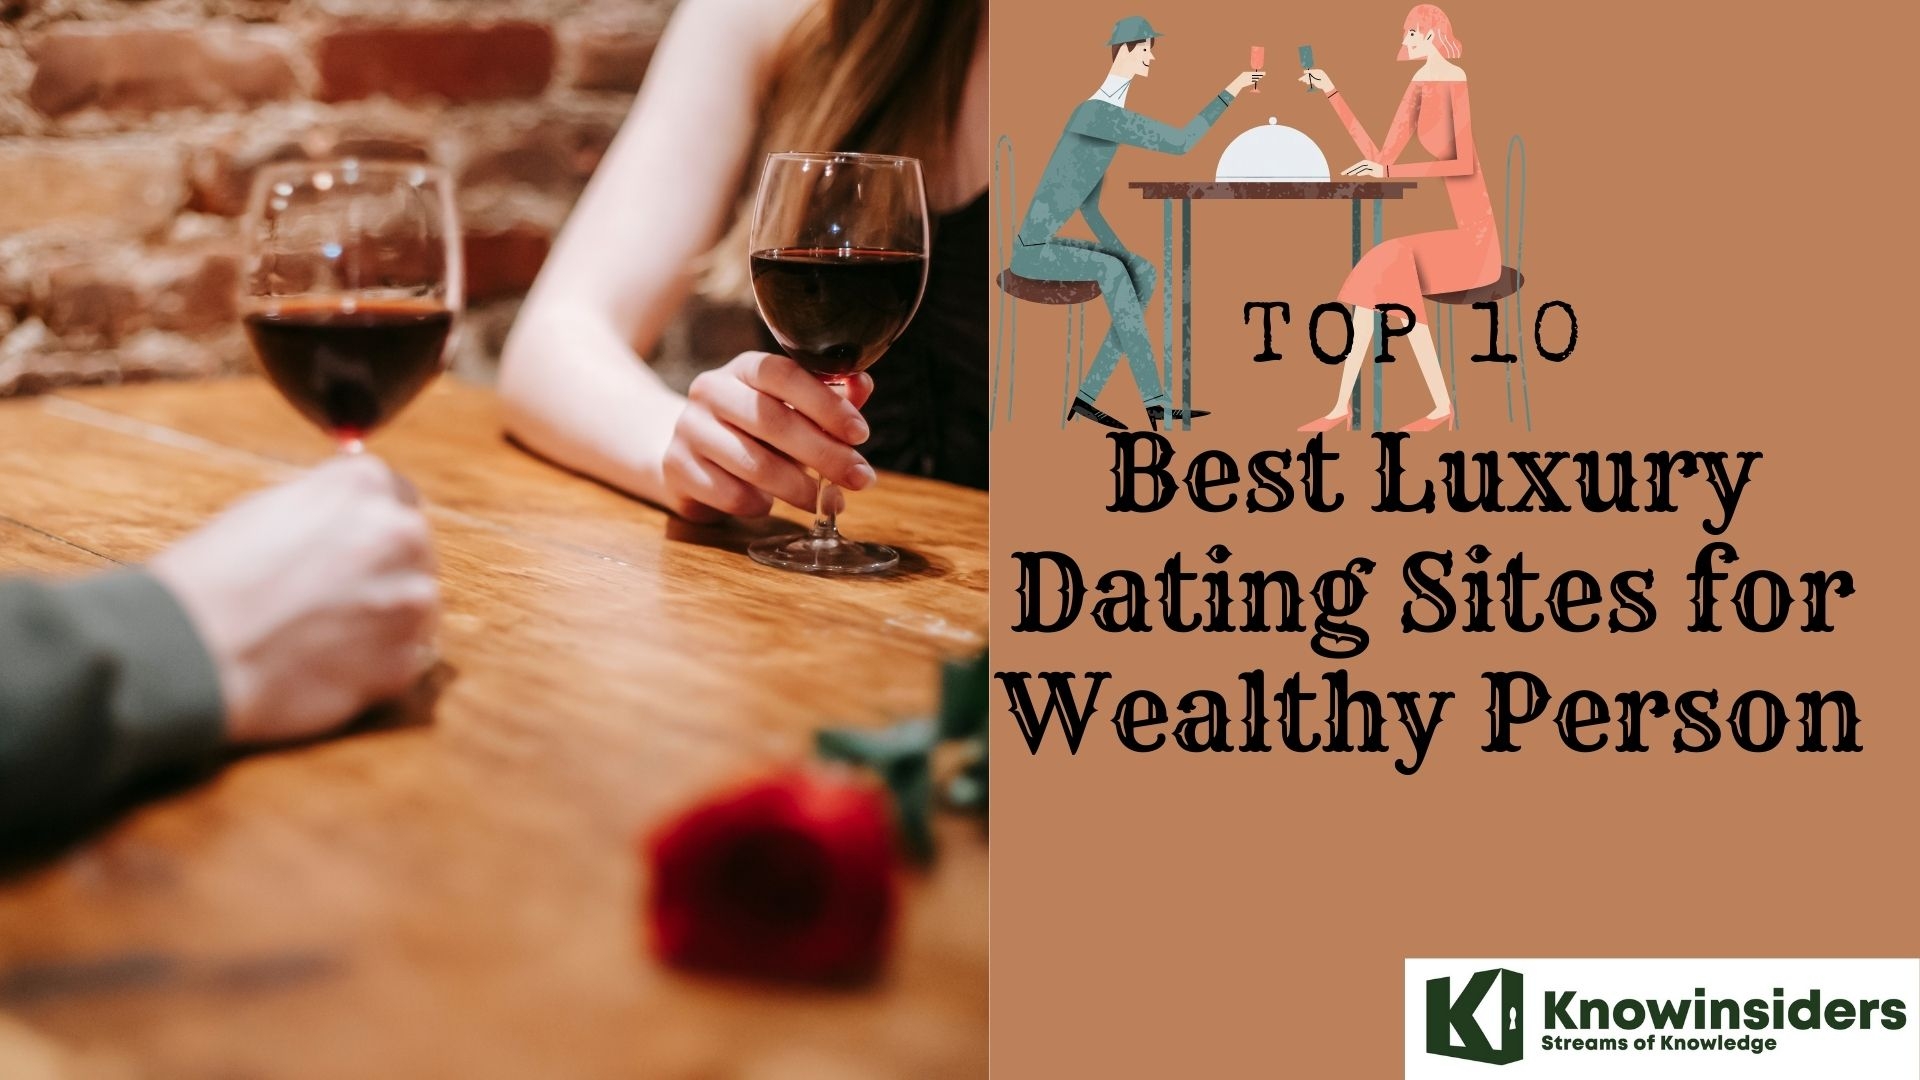 Top 10 Best Luxury Dating Sites for Wealthy Person